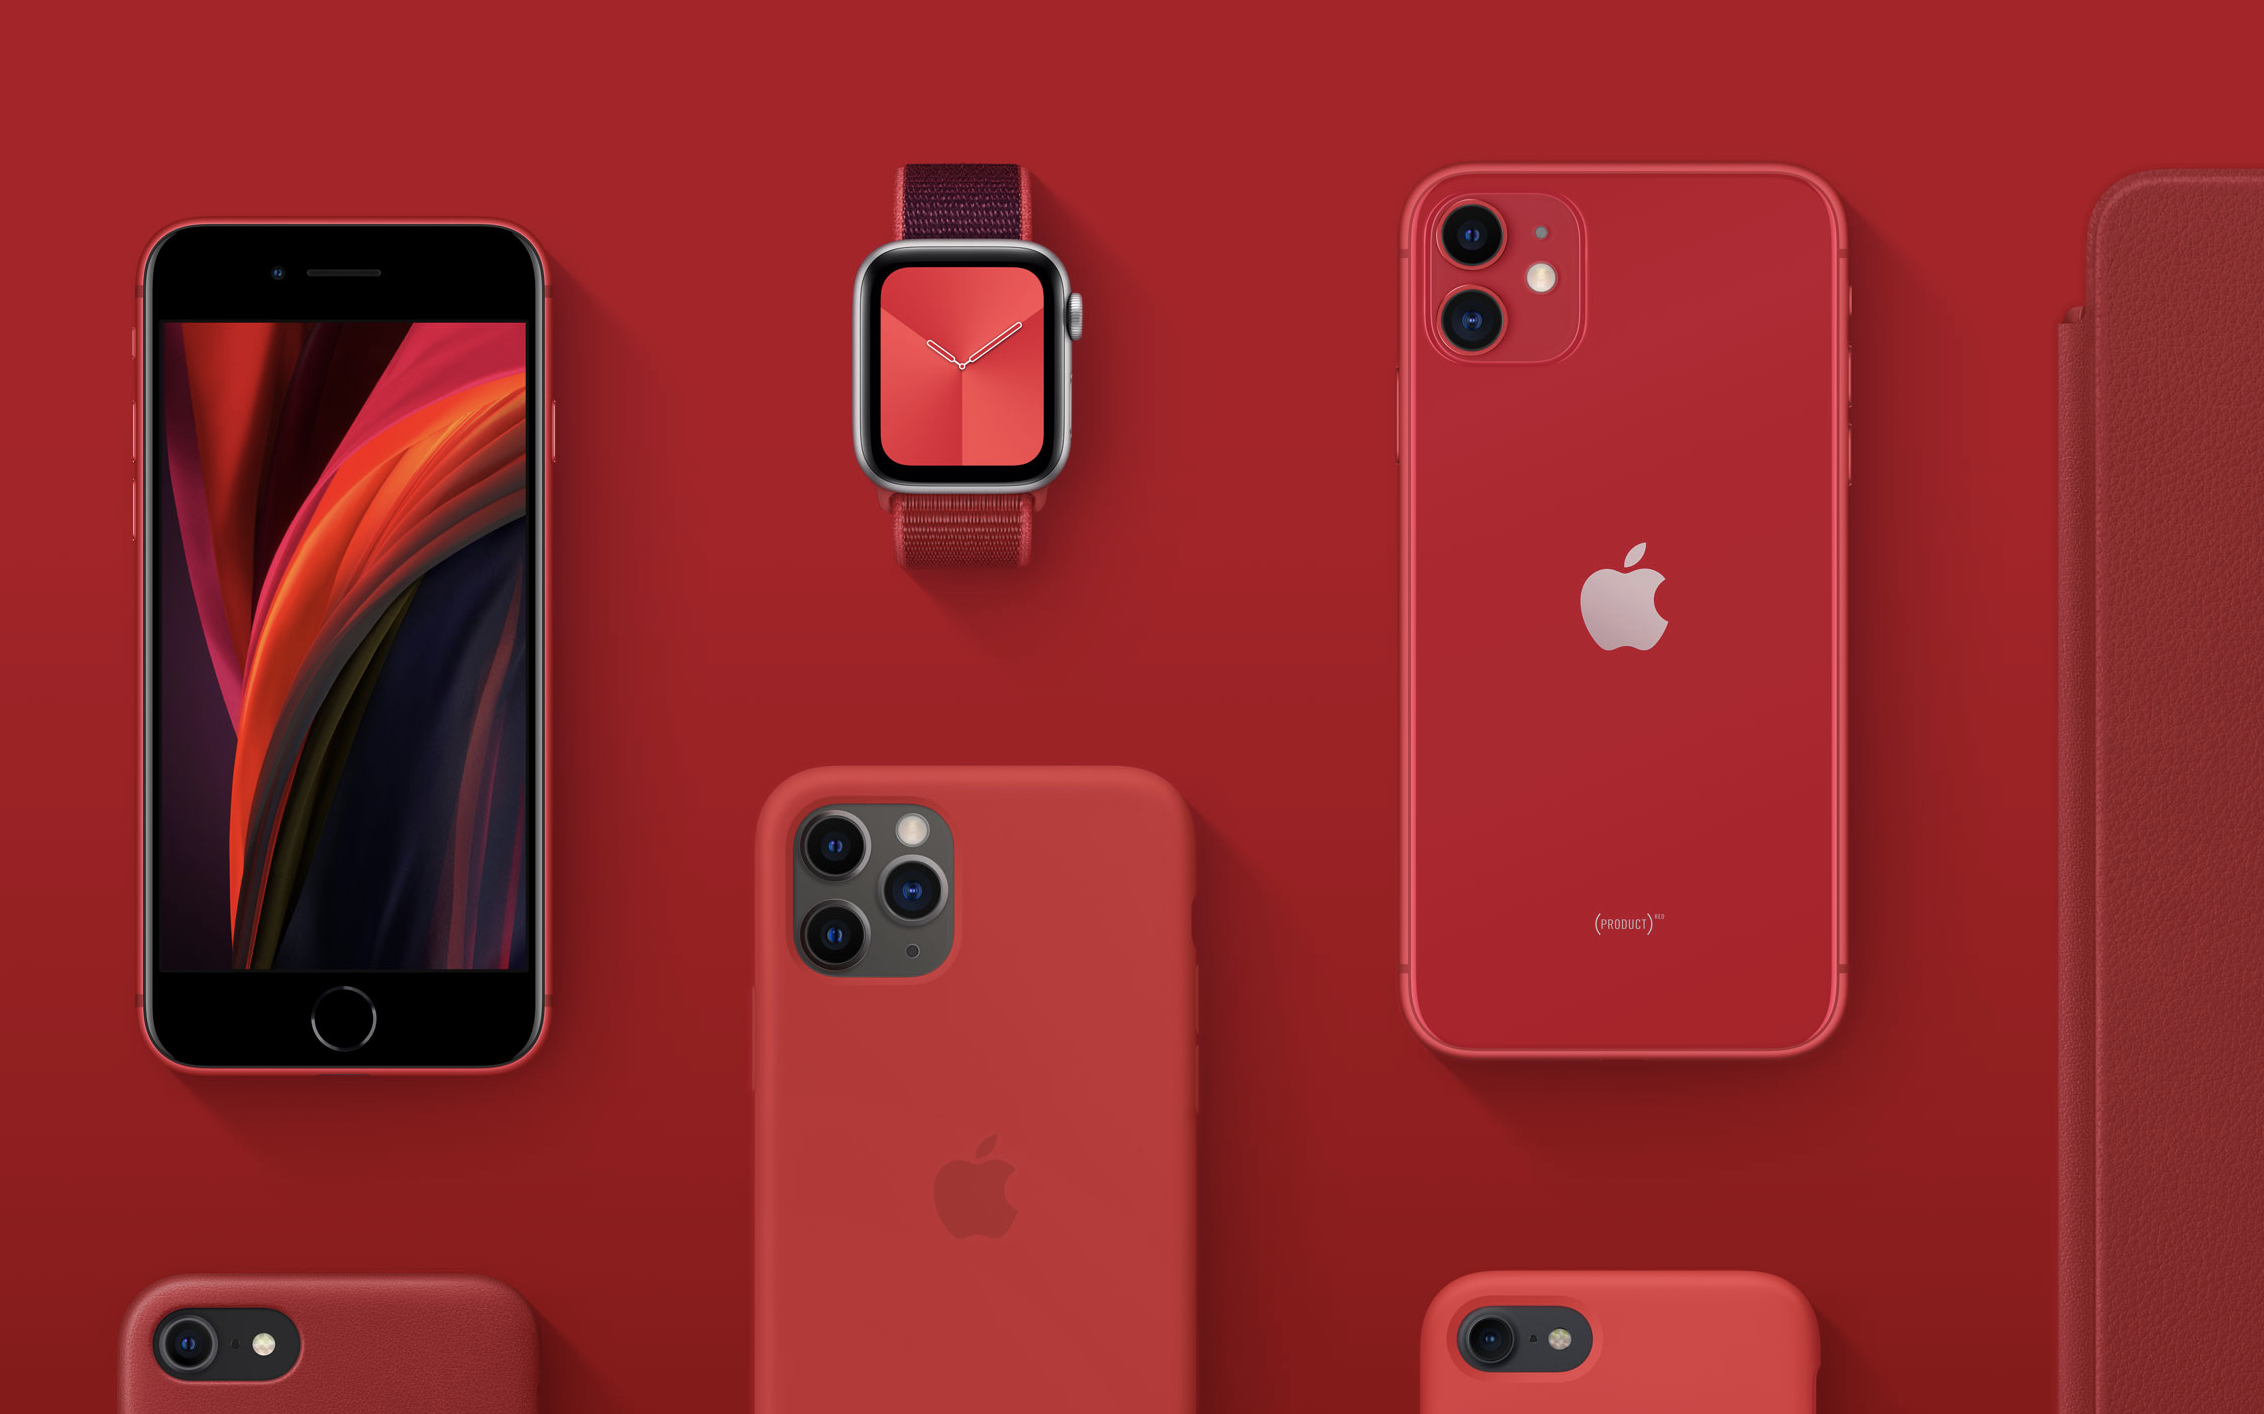 Apple Extends Partnership With (RED) to Combat COVID-19 Until December 30